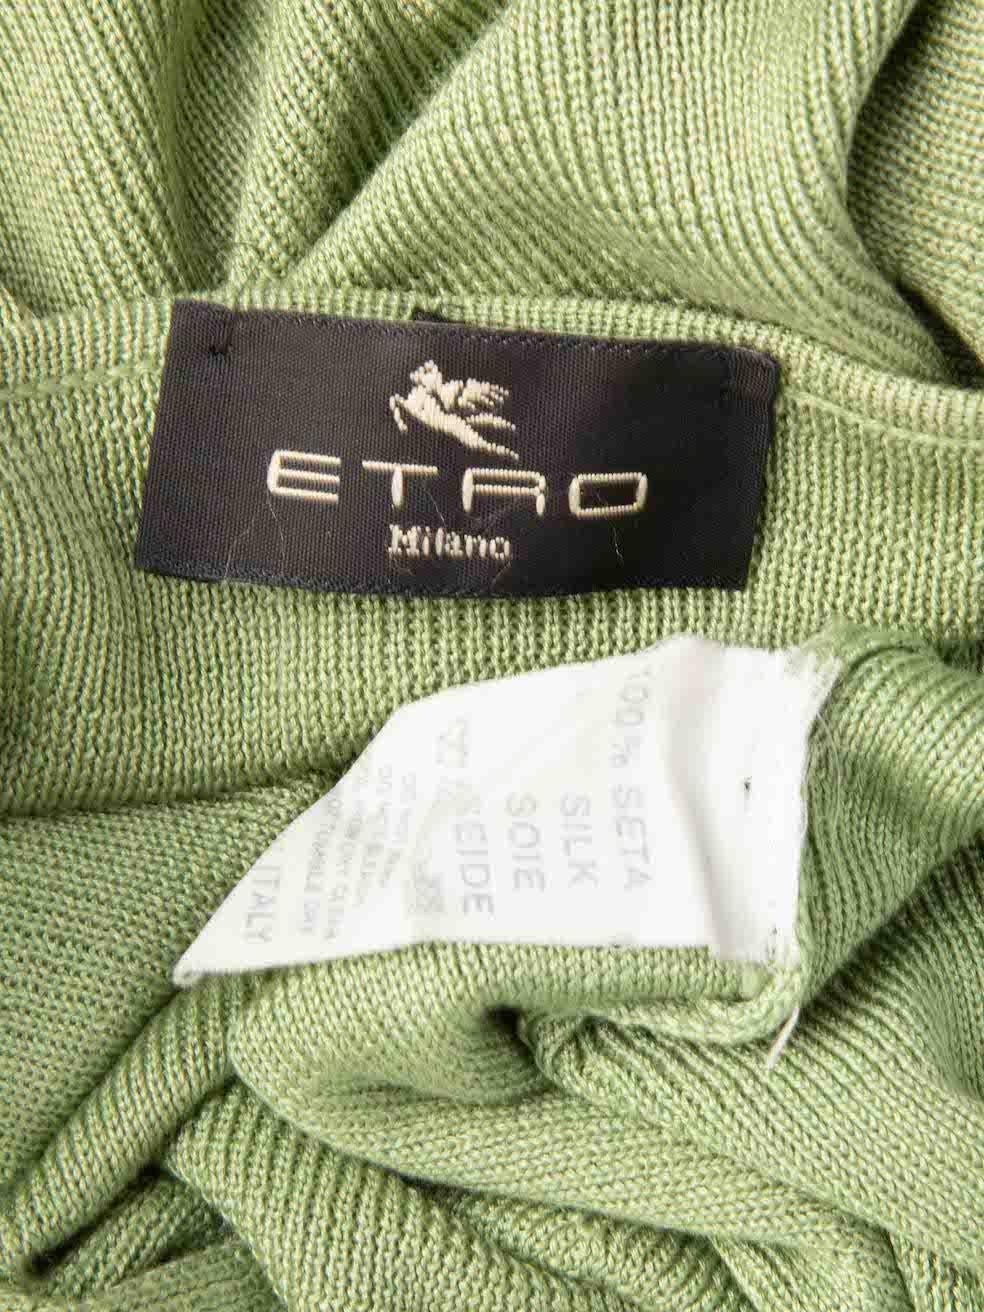 Etro Green Silk Knit Cardigan & Top Matching Set Size S For Sale 1